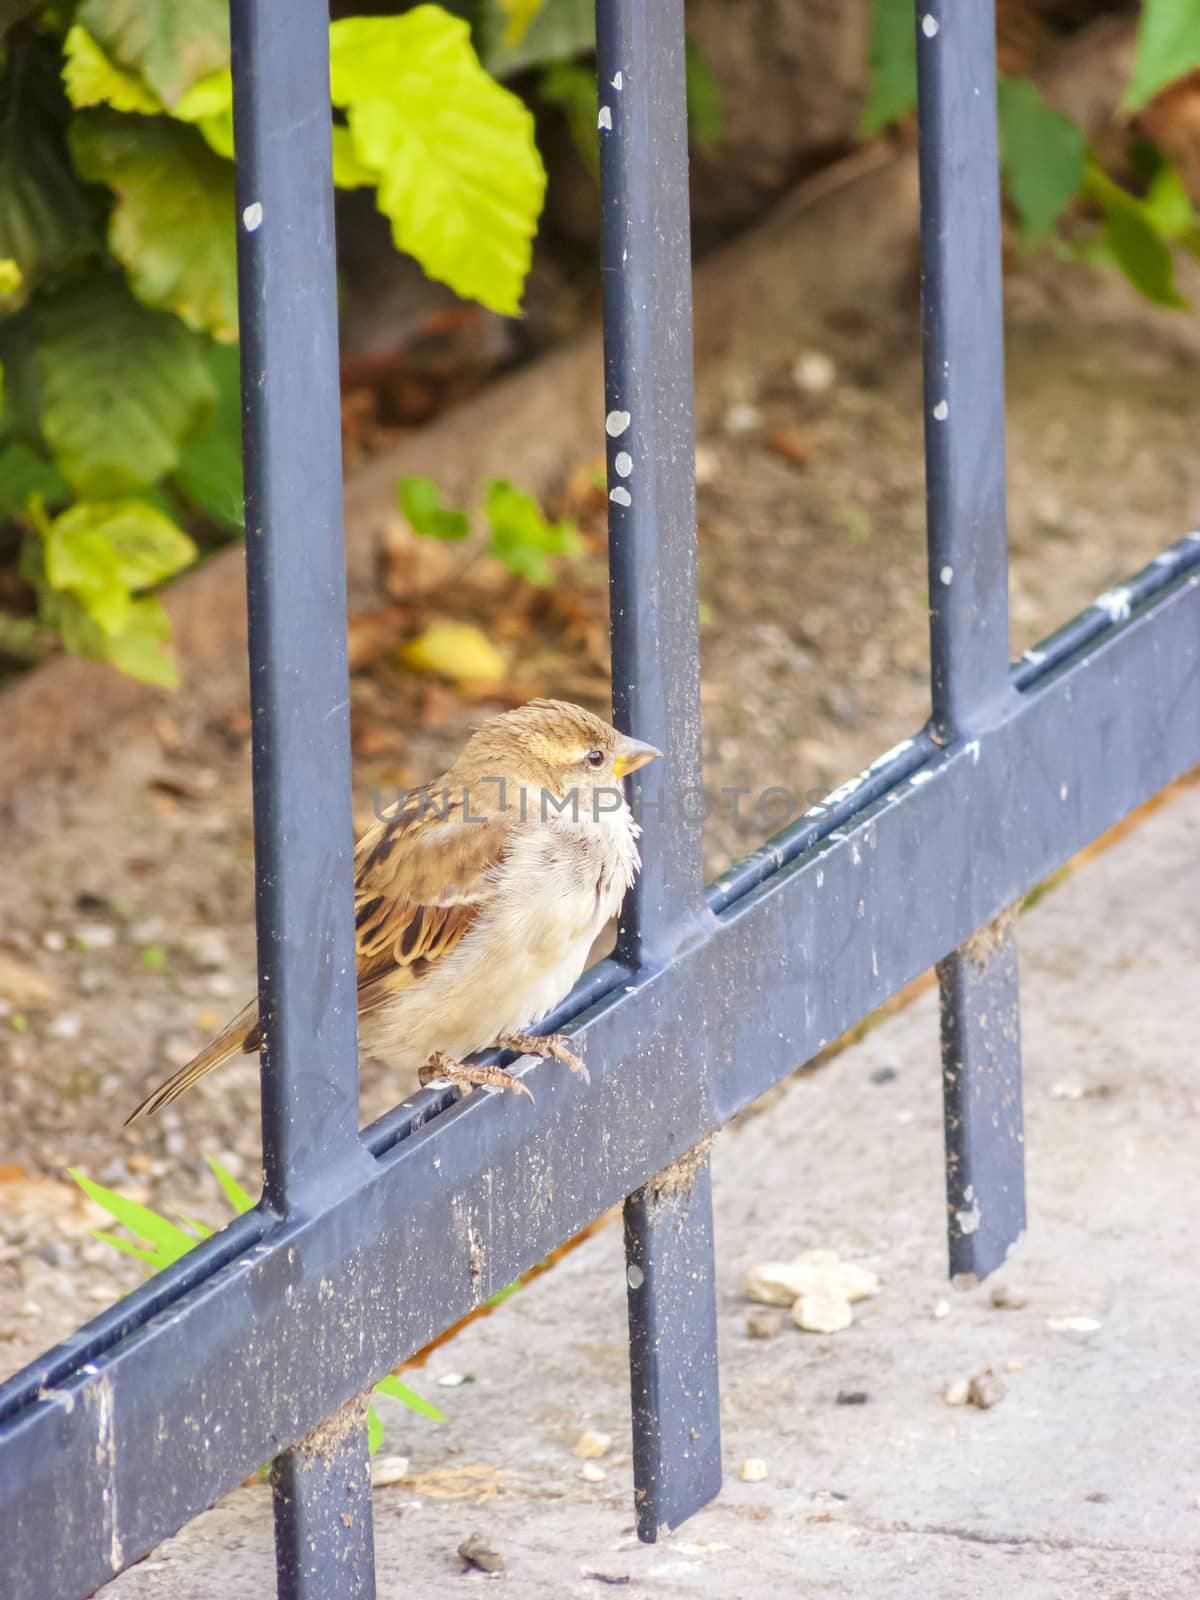 Sparrow sitting on the railing of a park.